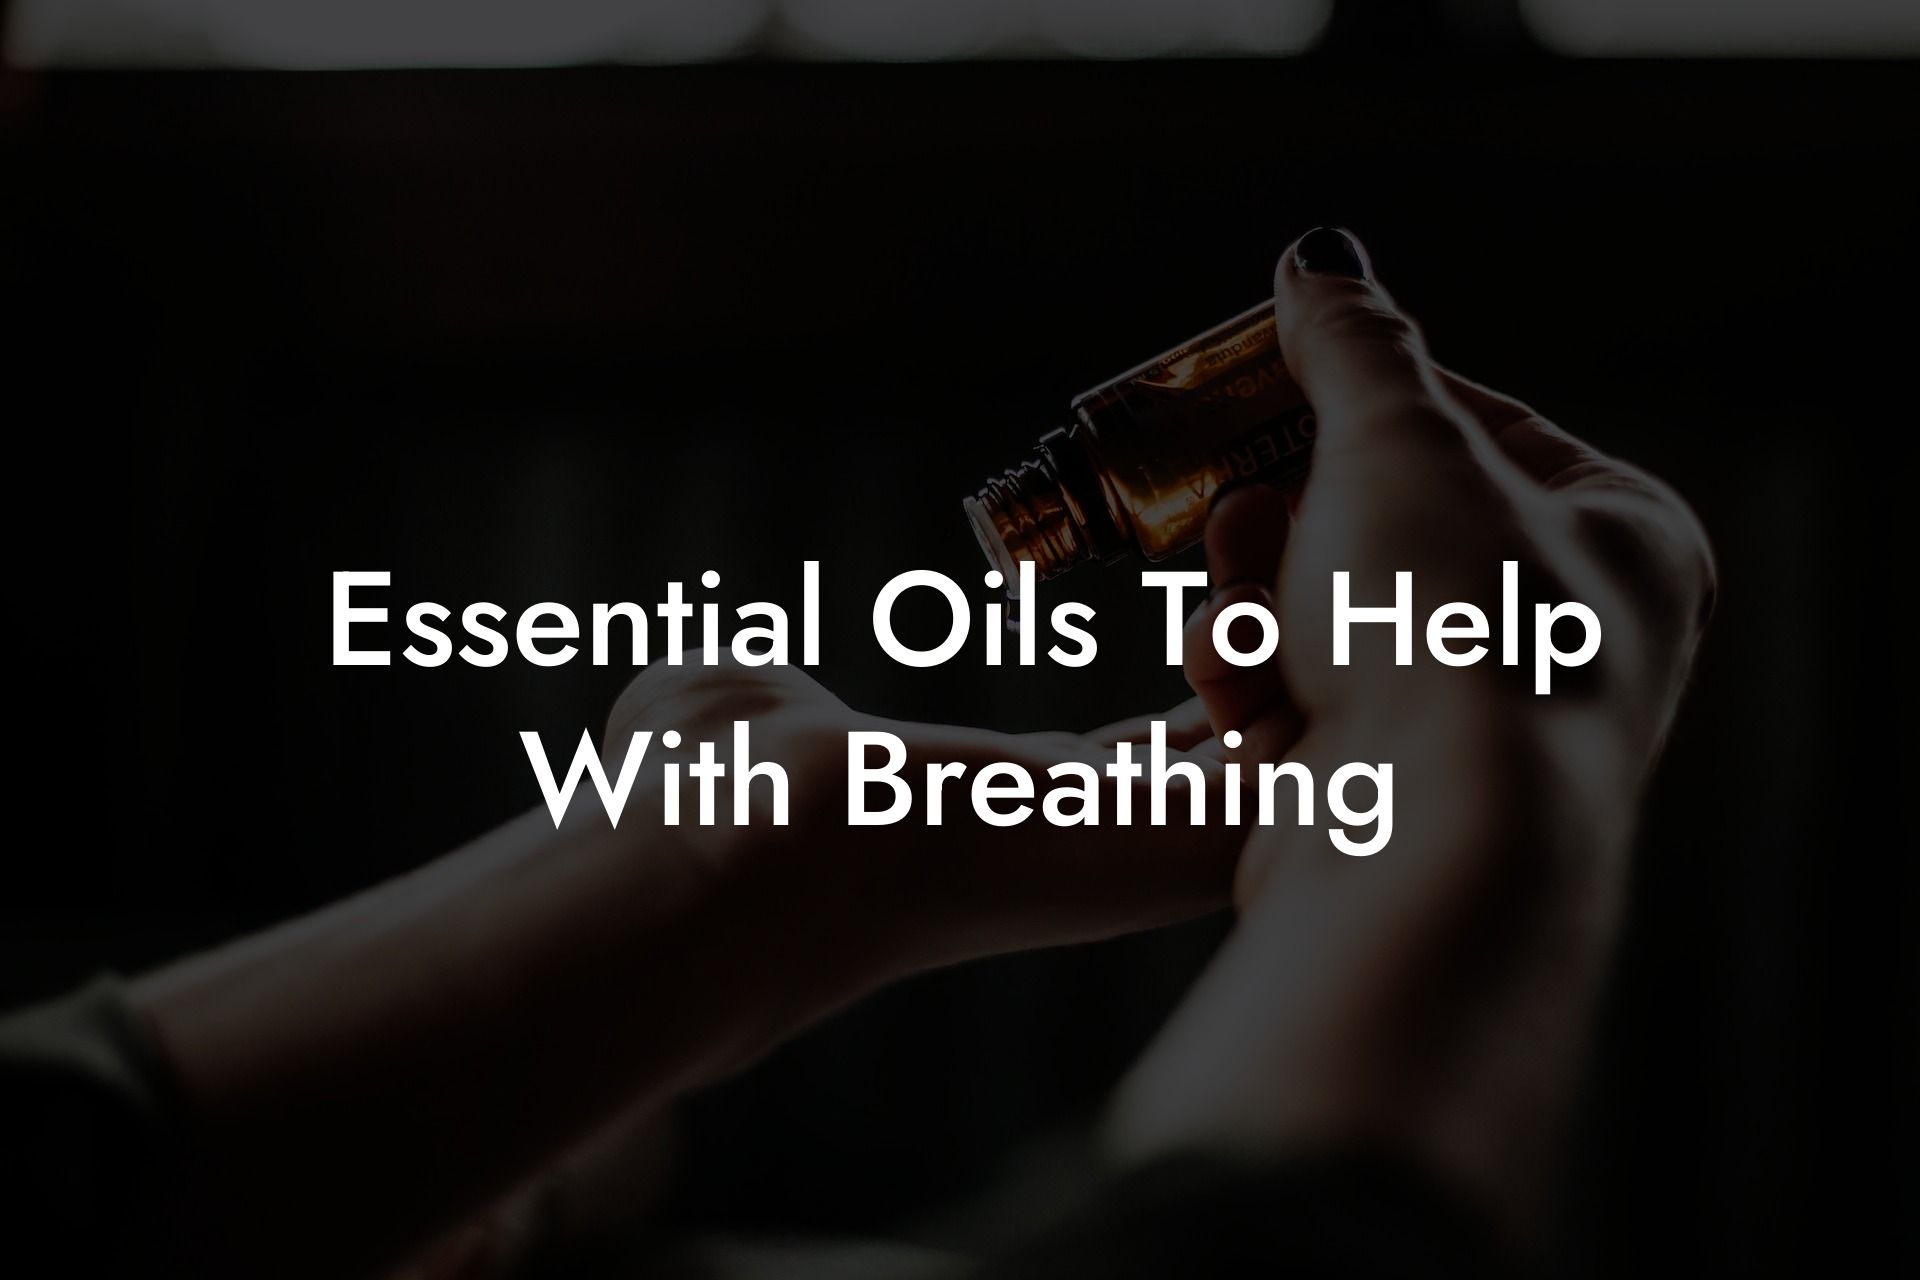 Essential Oils To Help With Breathing